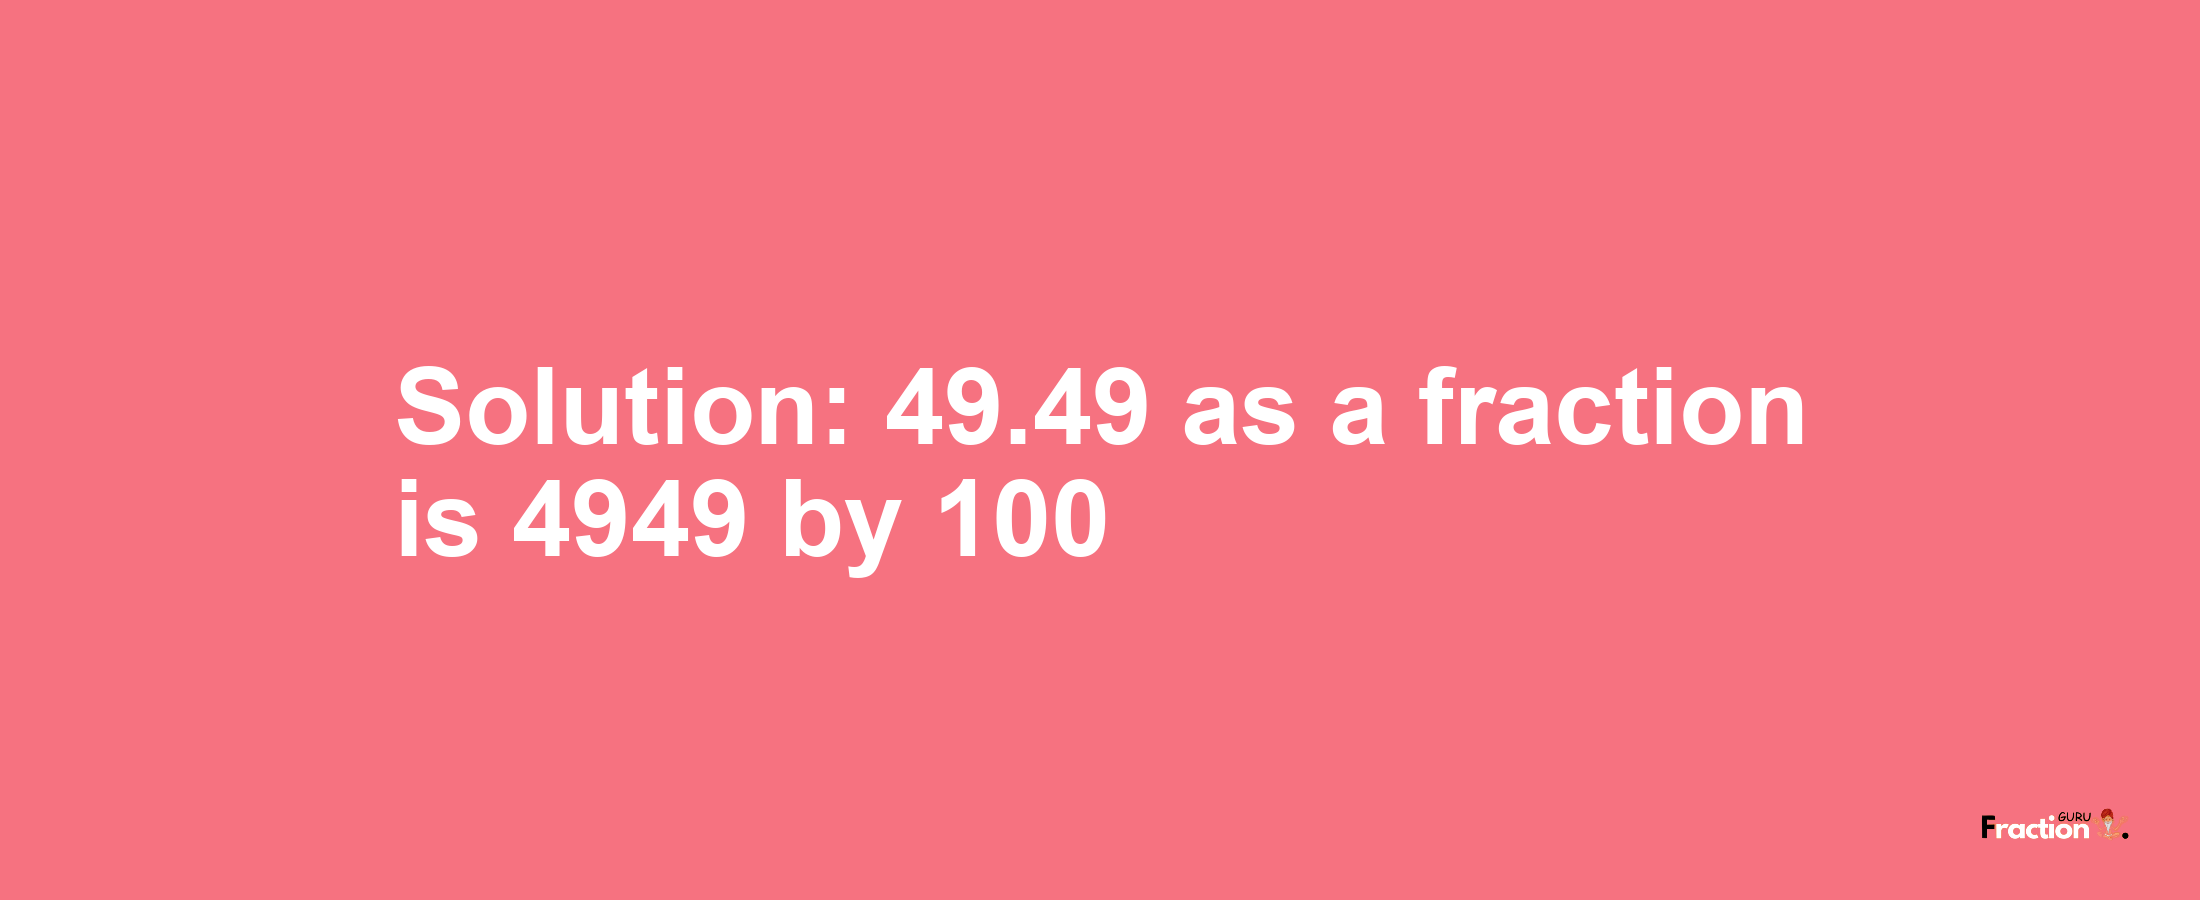 Solution:49.49 as a fraction is 4949/100